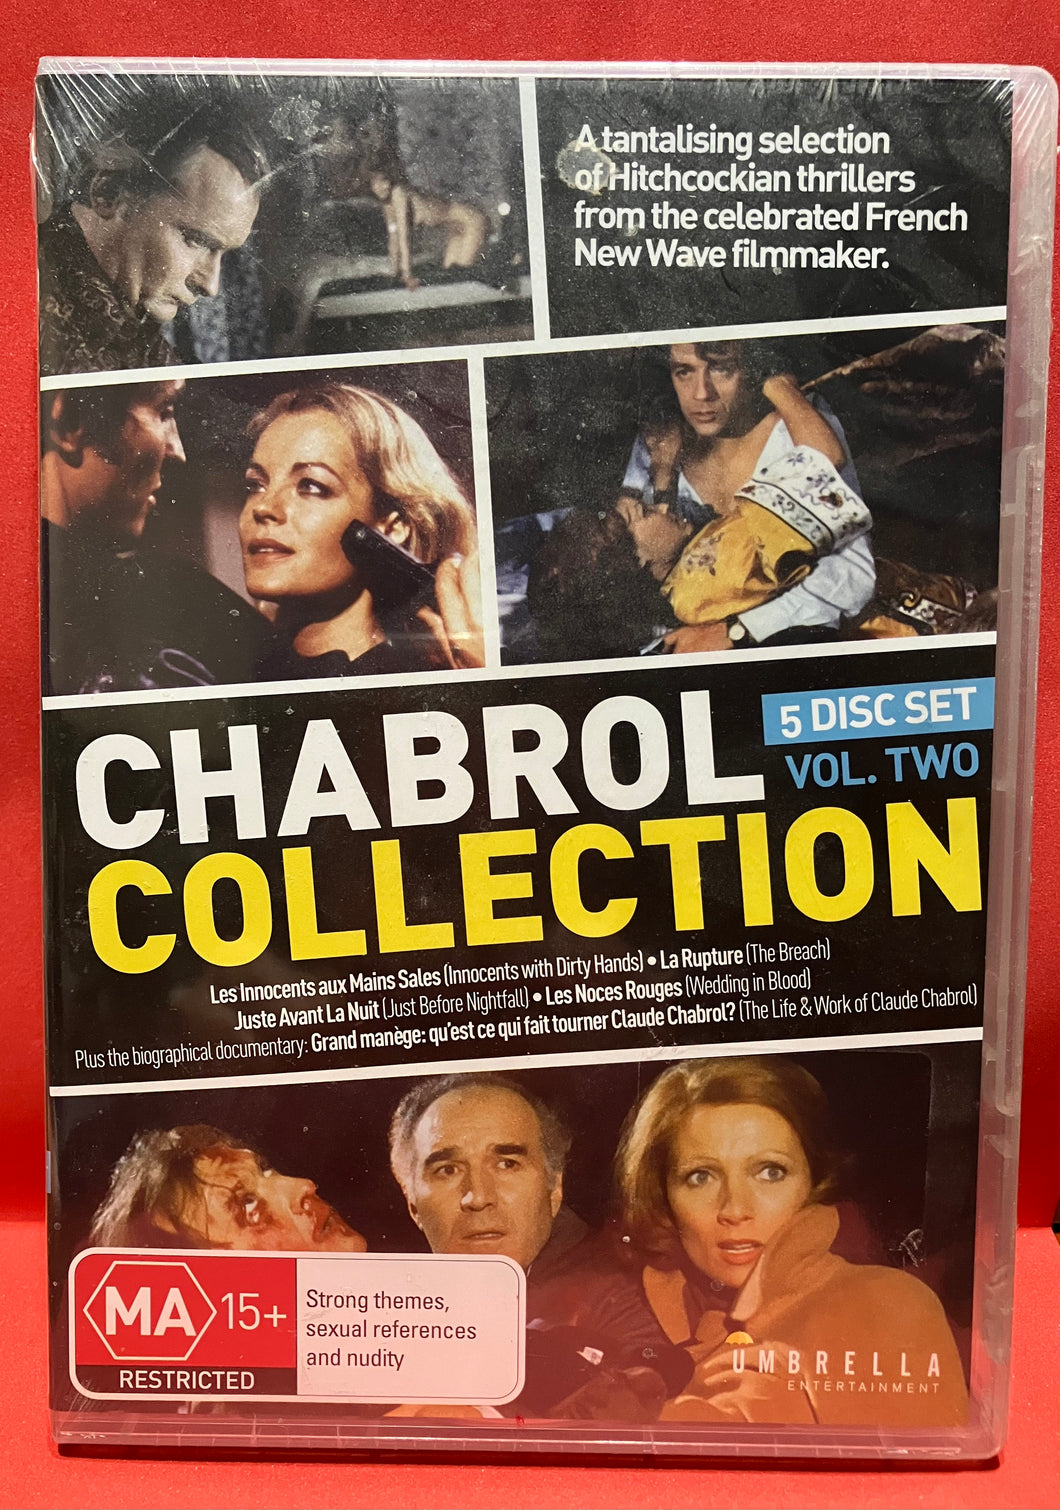 CHARBOL COLLECTION DVD